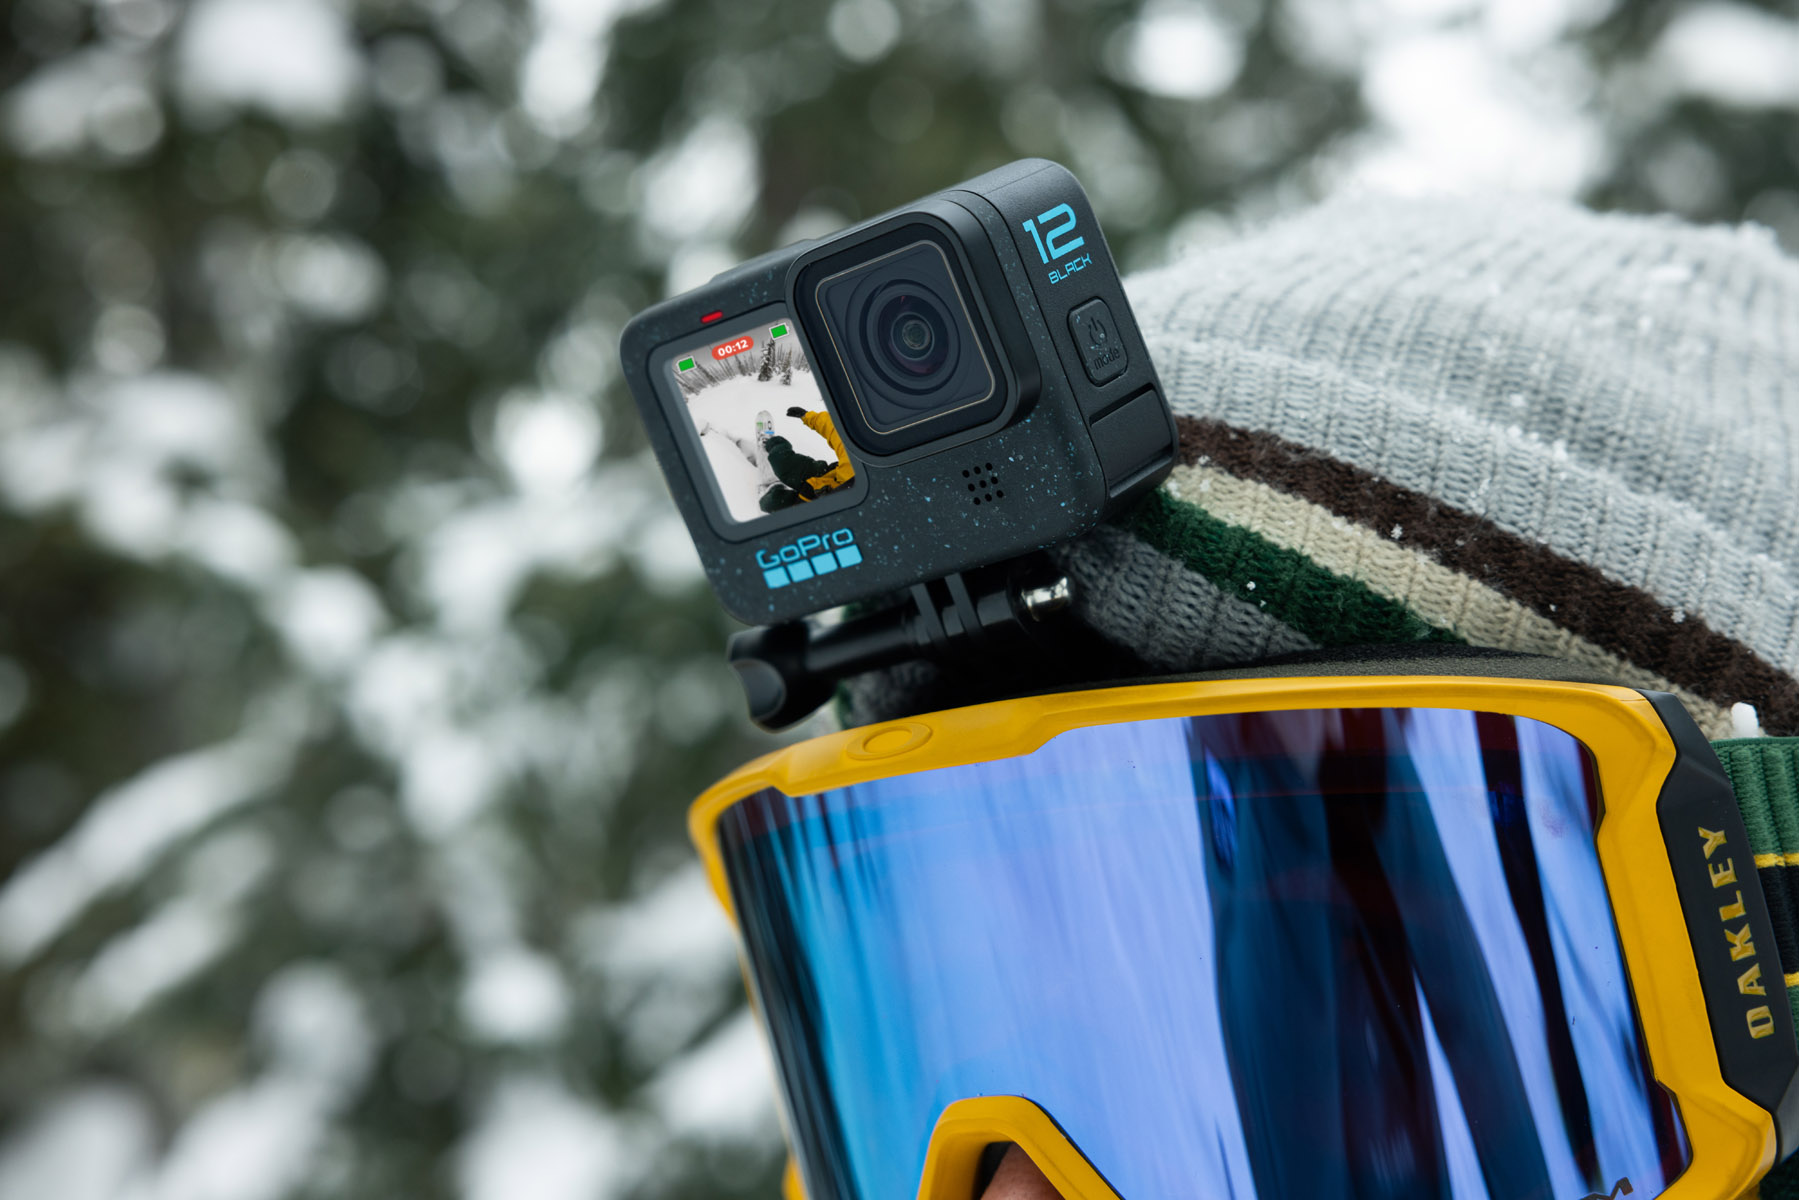 Entry-level GoPro HERO+ action camera with Wi-Fi unveiled: Digital  Photography Review